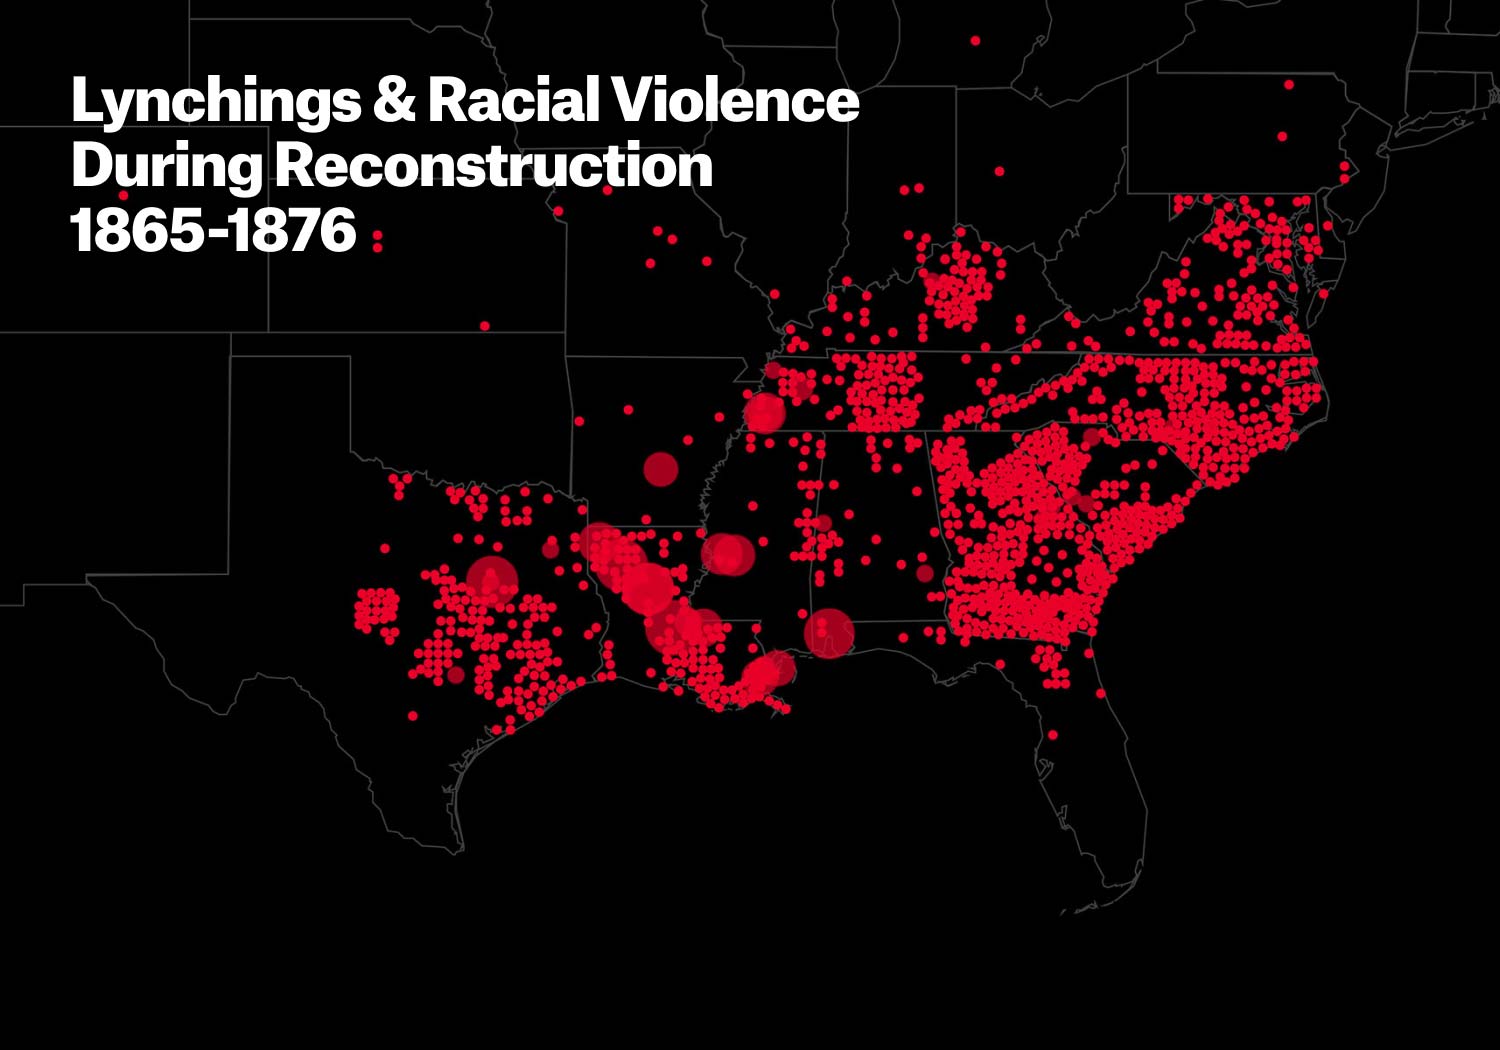 A black map of the U.S. with red dots that represent lynchings and racial violence during Reconstruction, from 1865 to 1876.